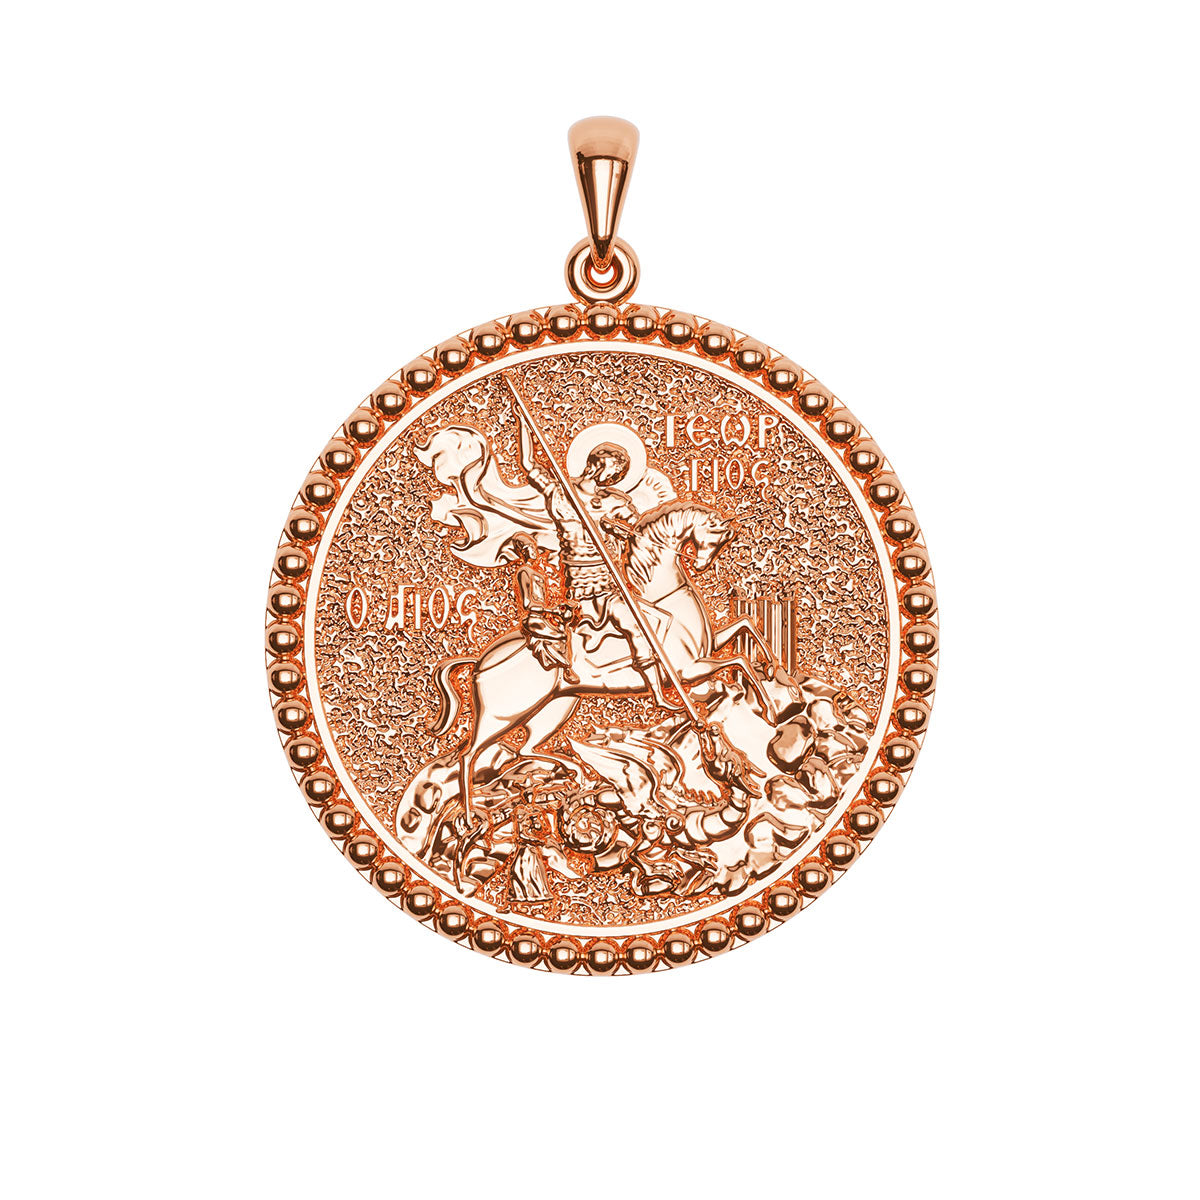 Saint George (Georgios) And the Dragon Sculpted Round Medal